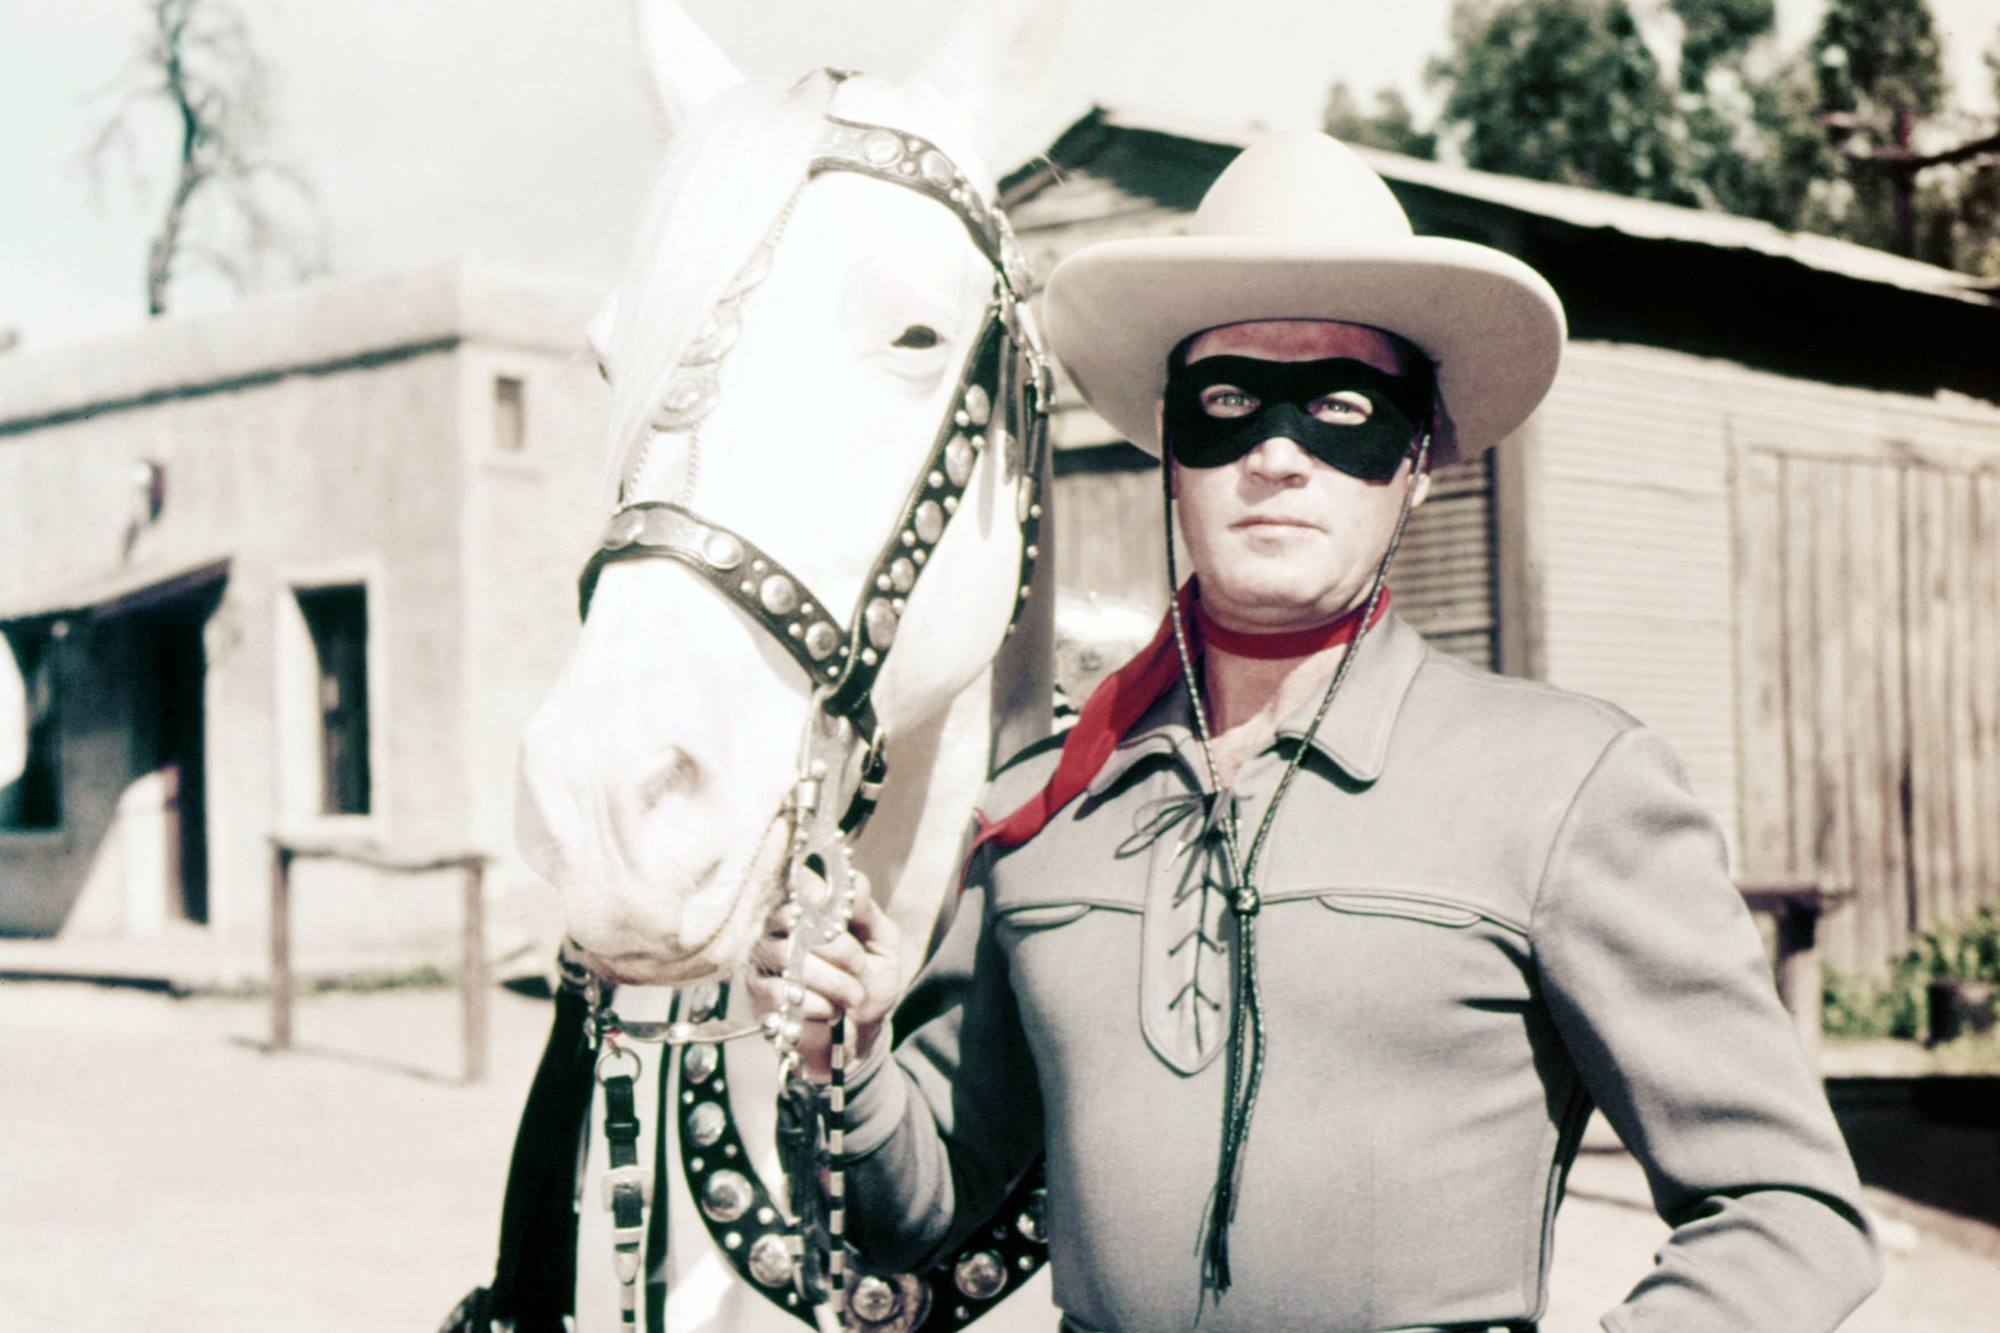 'The Lone Ranger' Clayton Moore as the Lone Ranger. He's wearing his Western costume and mask, while standing next to a white horse.